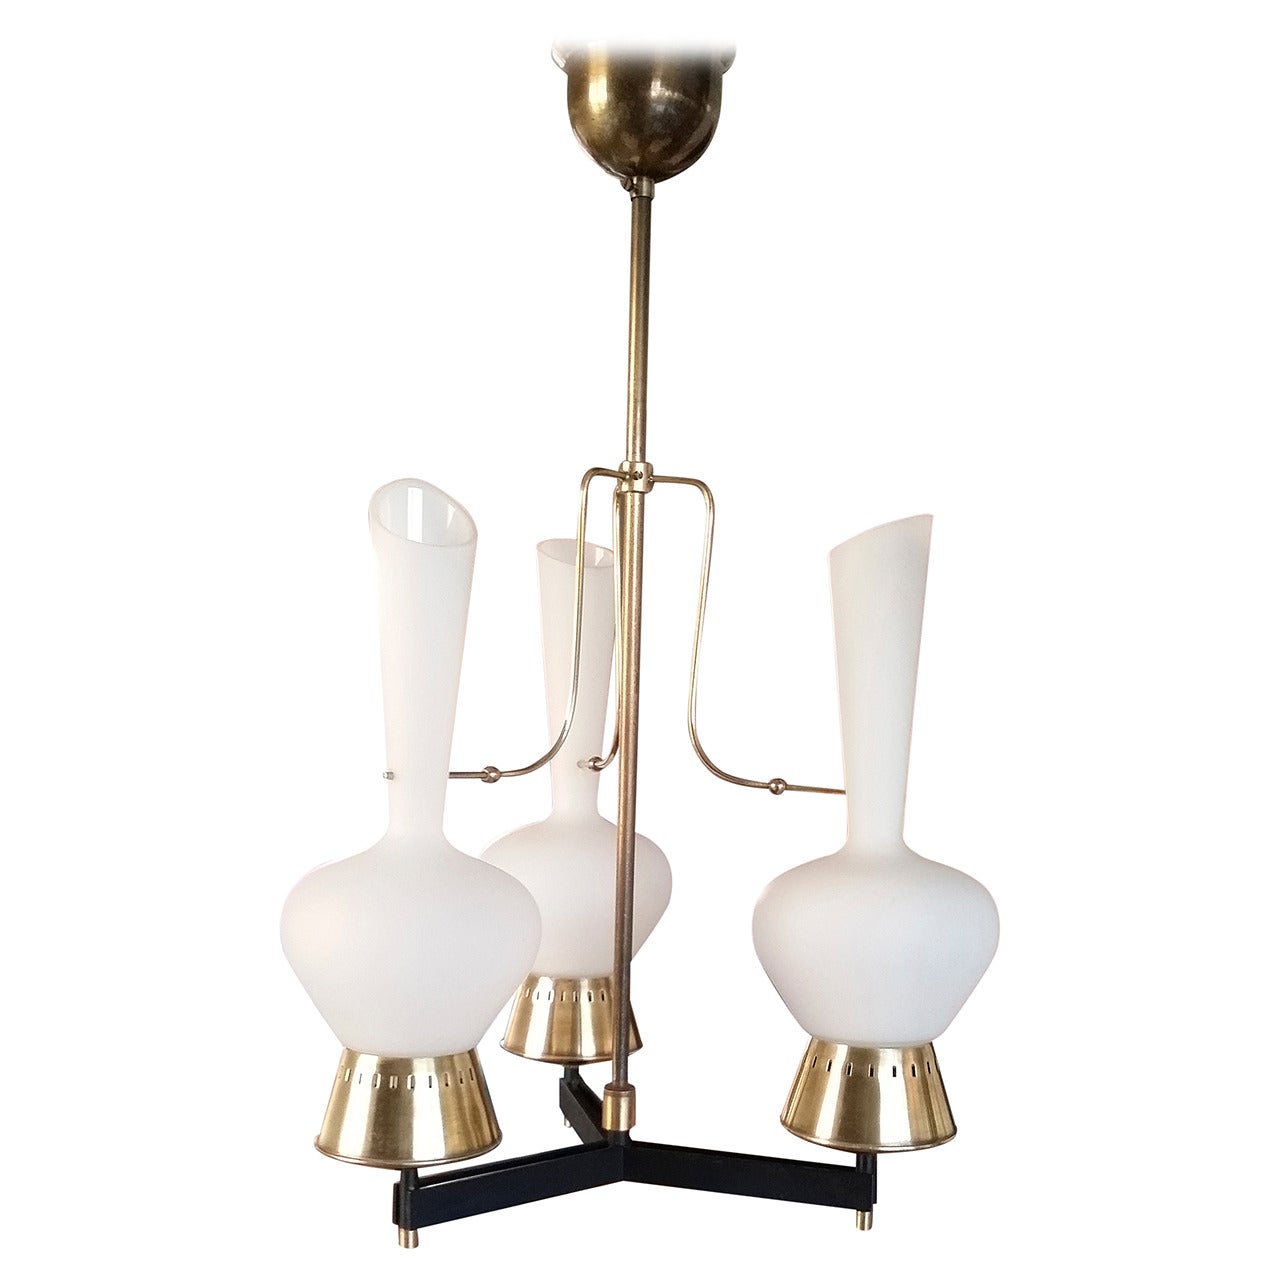 Exceptional Three-Light Chandelier Attributed to Stilnovo, Italy 1960s